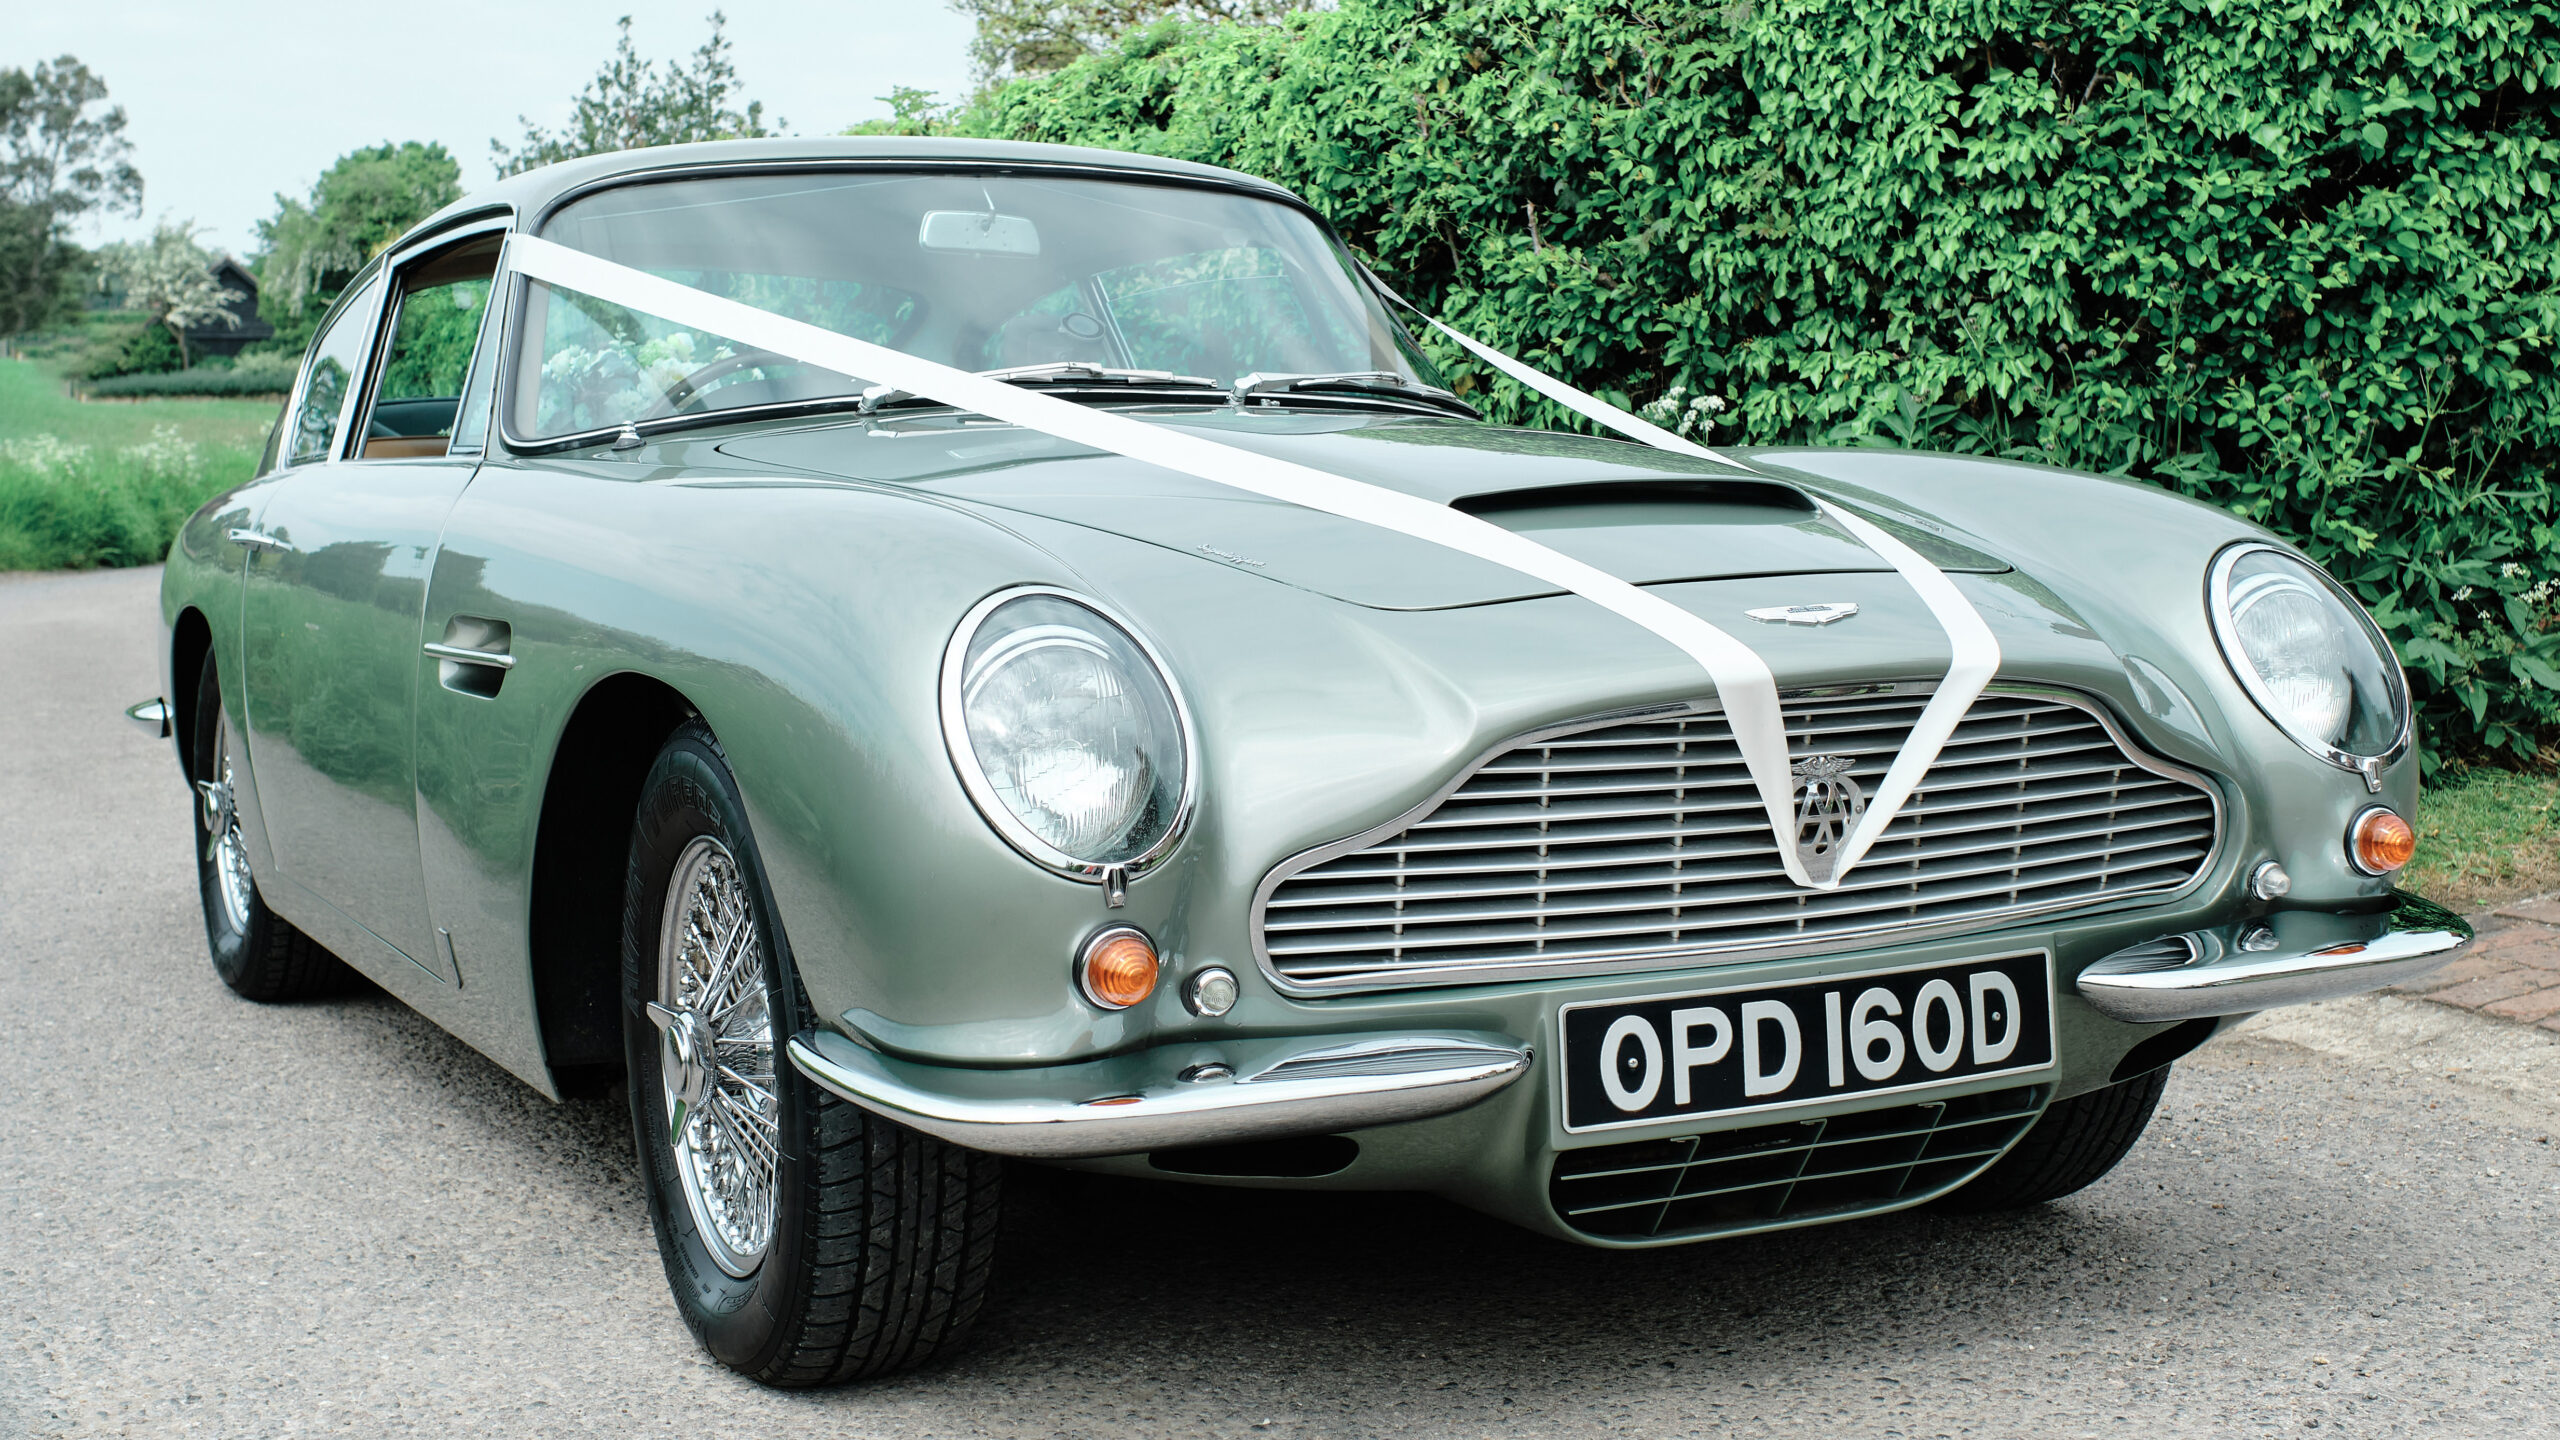 Aston Martin DB6 wedding car for hire in Uckfield, East Sussex